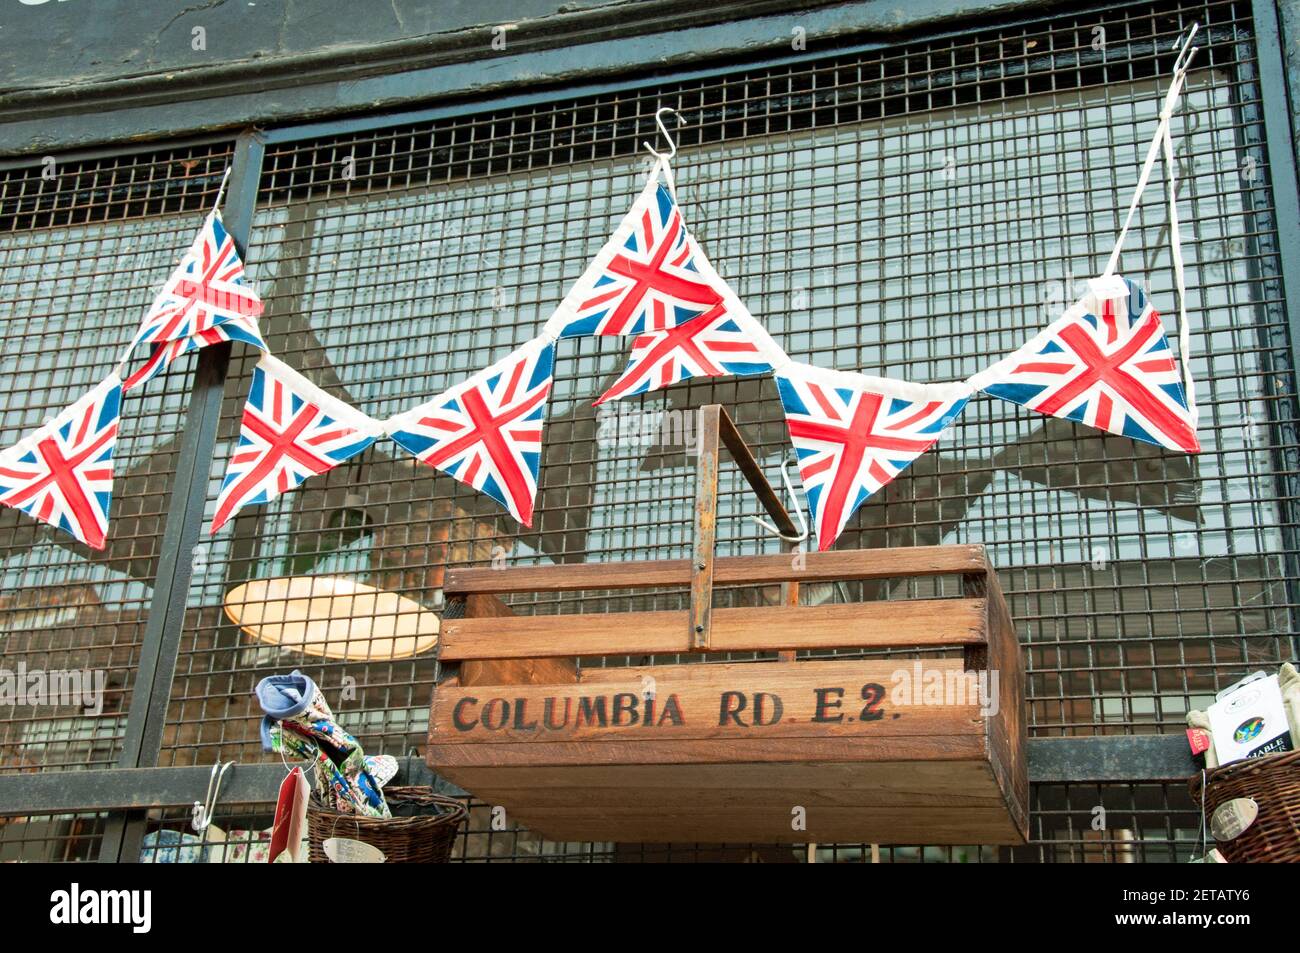 Union Jack or Flag bunting above trug box with Columbia Road, E2 printed on side outside shop in market Stock Photo